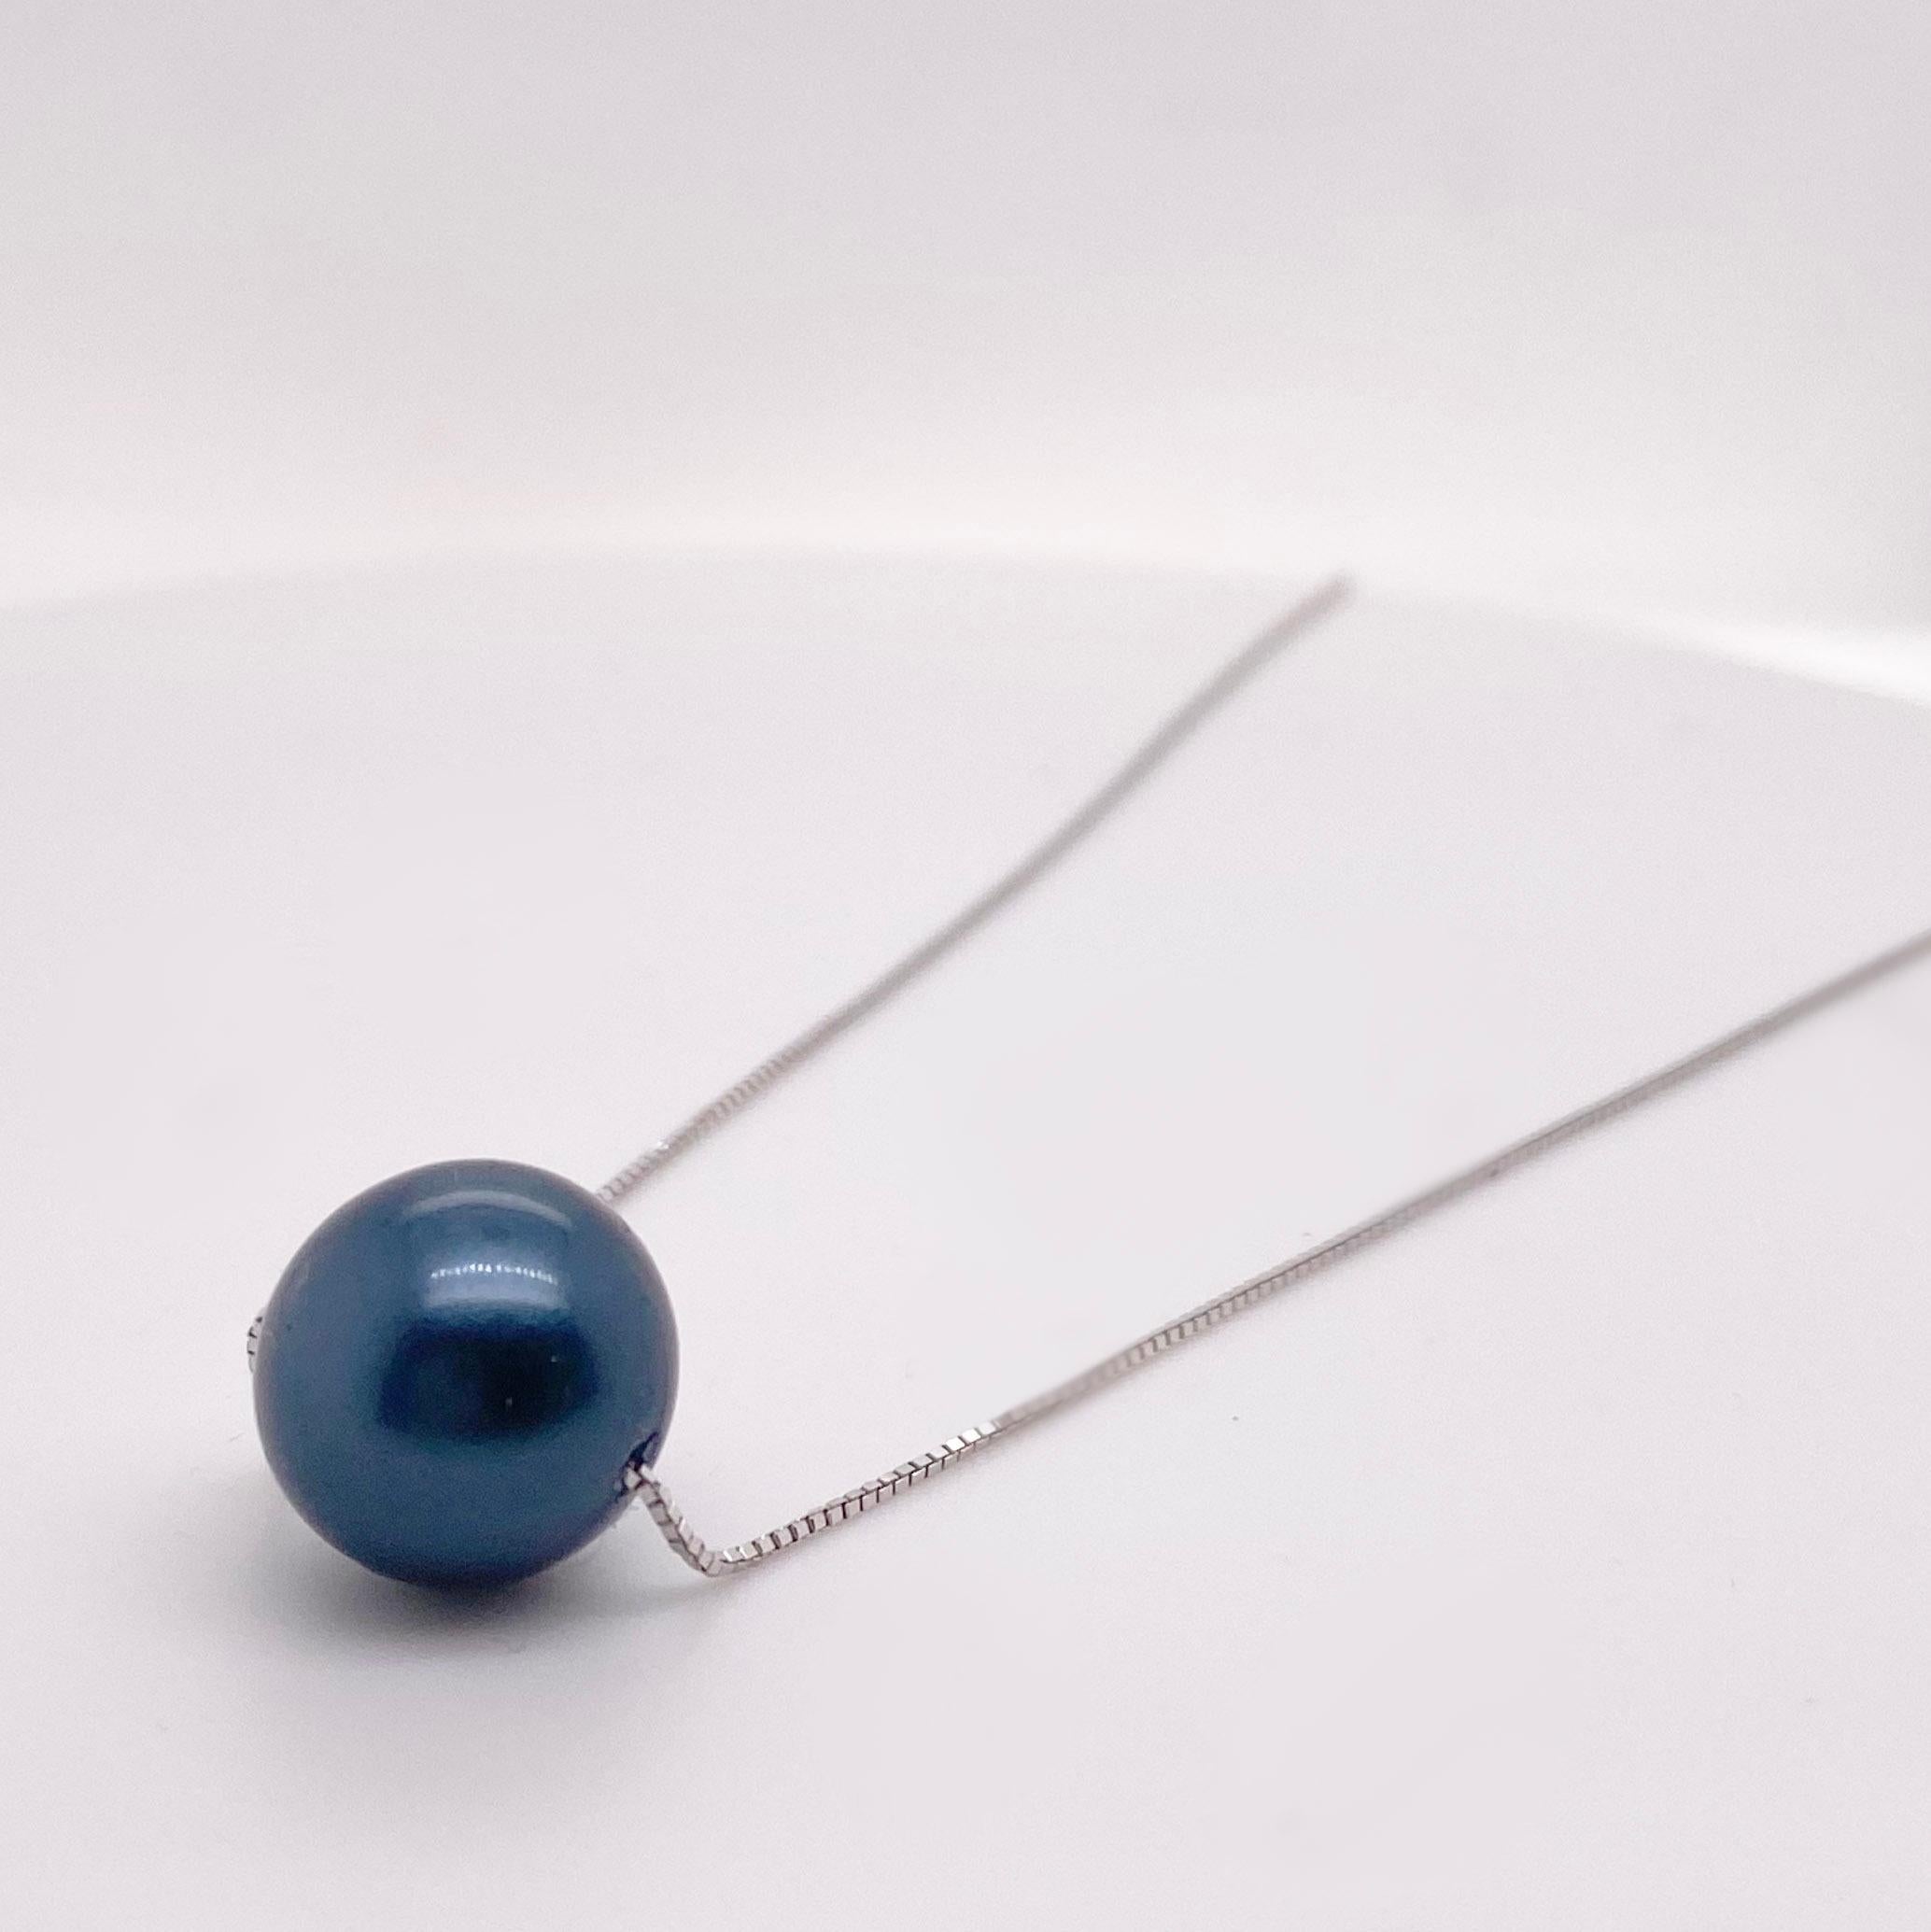 This necklace is great to wear because of it’s simplicity and beauty. The 12 millimeter mother-of-pearl round bead is full drilled and is perfectly paired with a mirror baby box chain. The pearl has a lovely sheen and iridescence. This is a great